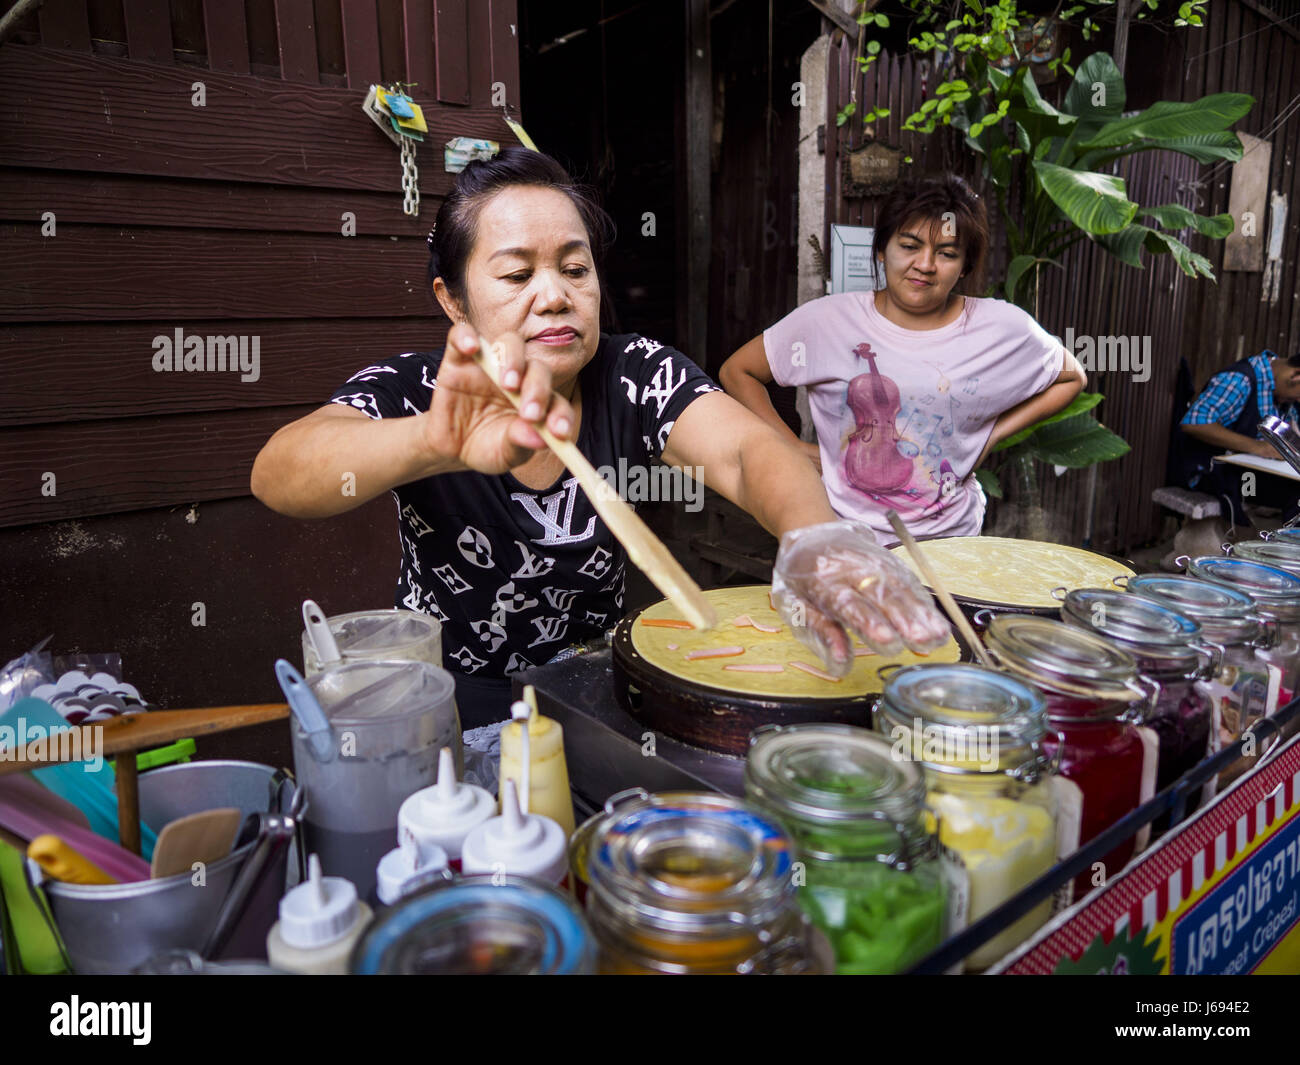 Bangkok, Bangkok, Thailand. 16th May, 2017. A street food vendor who makes sweet or savory (dessert or spicy) crepes prepares an order in Pom Mahakan. The final evictions of the remaining families in Pom Mahakan, a slum community in a 19th century fort in Bangkok, have started. City officials are moving the residents out of the fort. NGOs and historic preservation organizations protested the city's action but city officials did not relent and started evicting the remaining families in early March. Credit: Jack Kurtz/ZUMA Wire/Alamy Live News Stock Photo